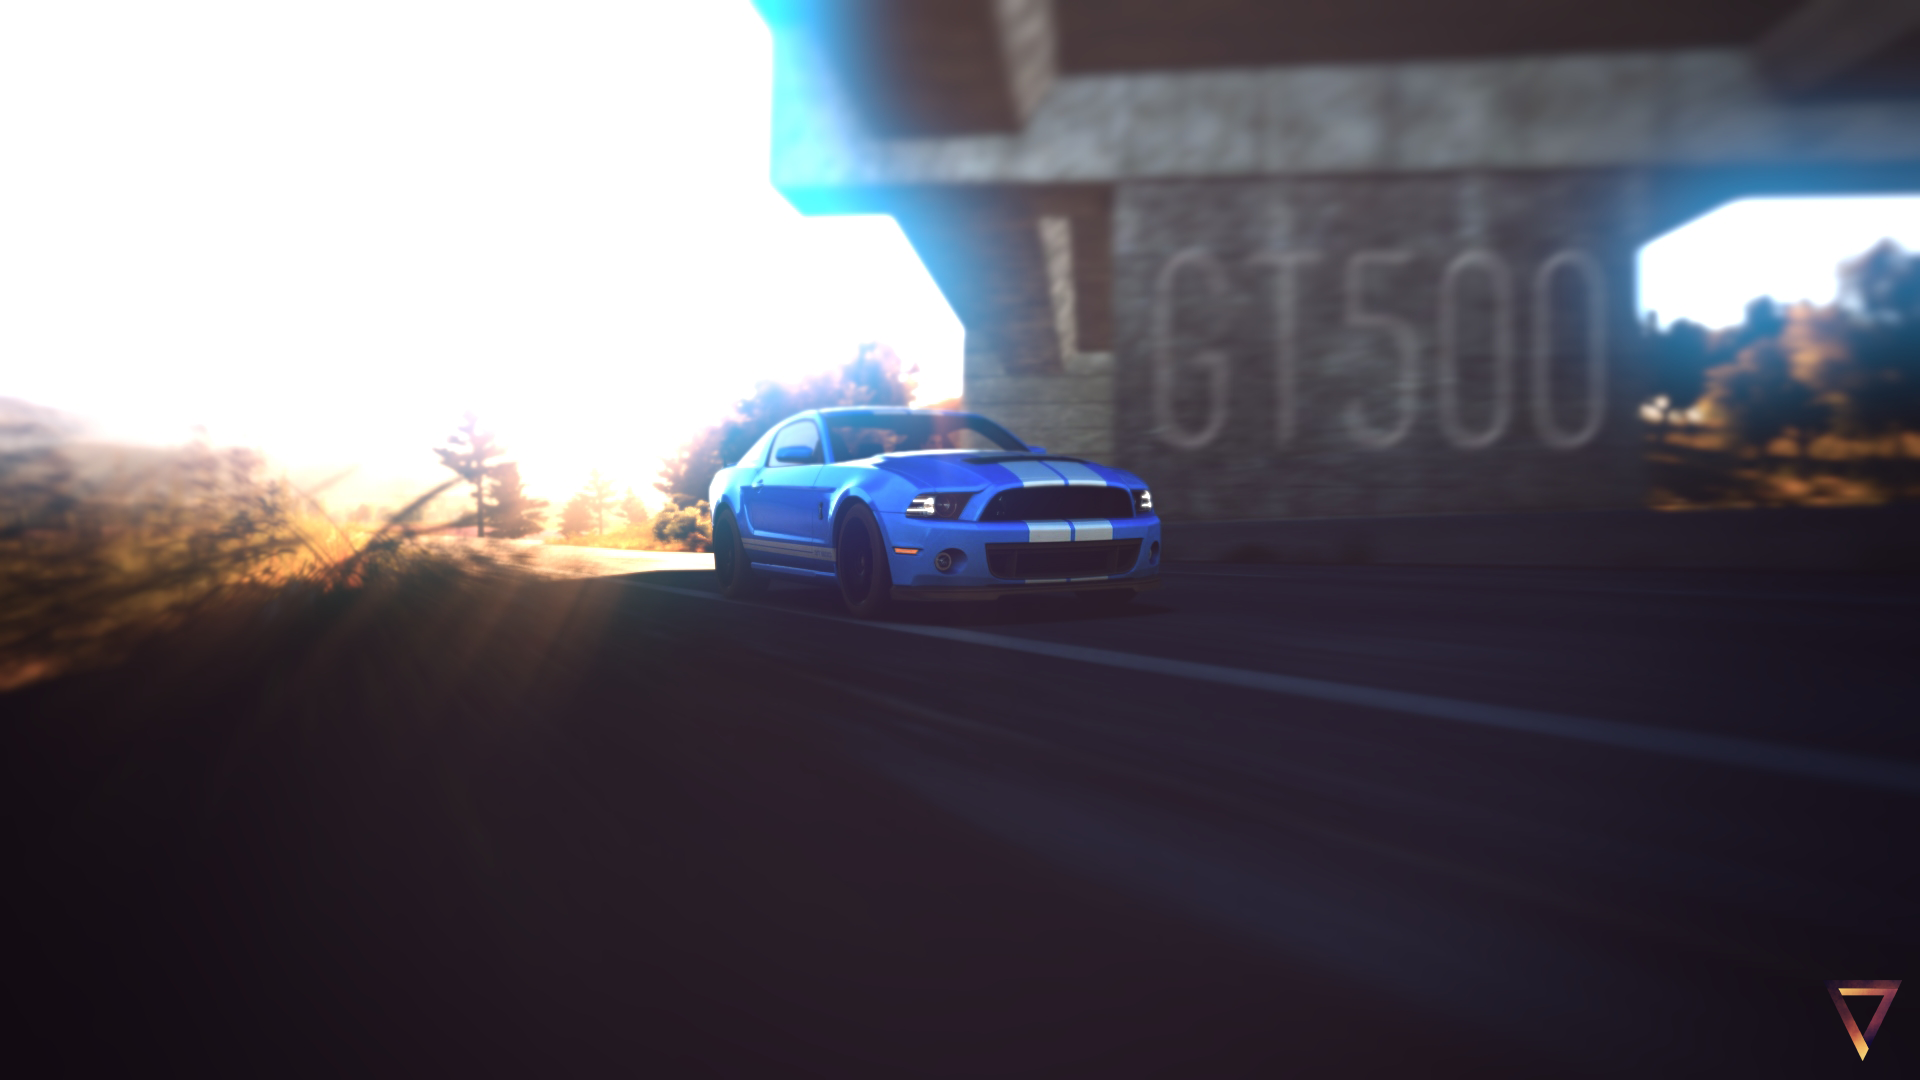 Gt500 2013 Ford Ford Mustang Shelby Blue Cars 1920x1080